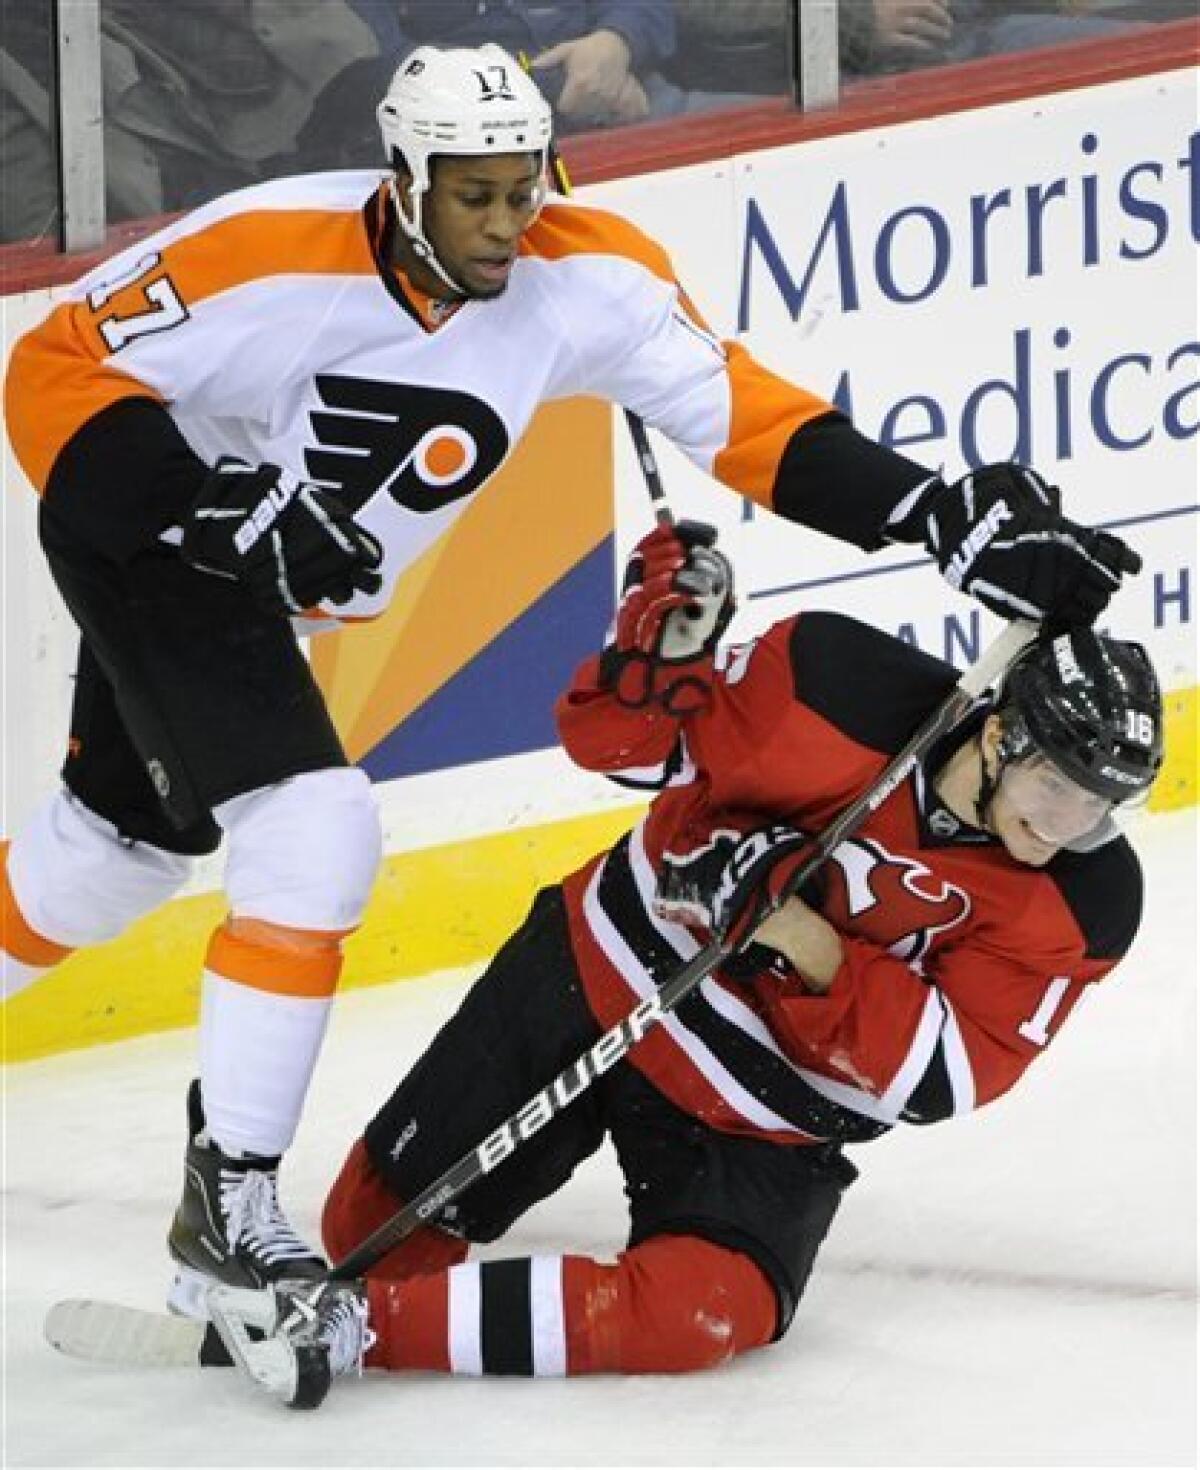 Former Flyer Wayne Simmonds signs with rival New Jersey Devils